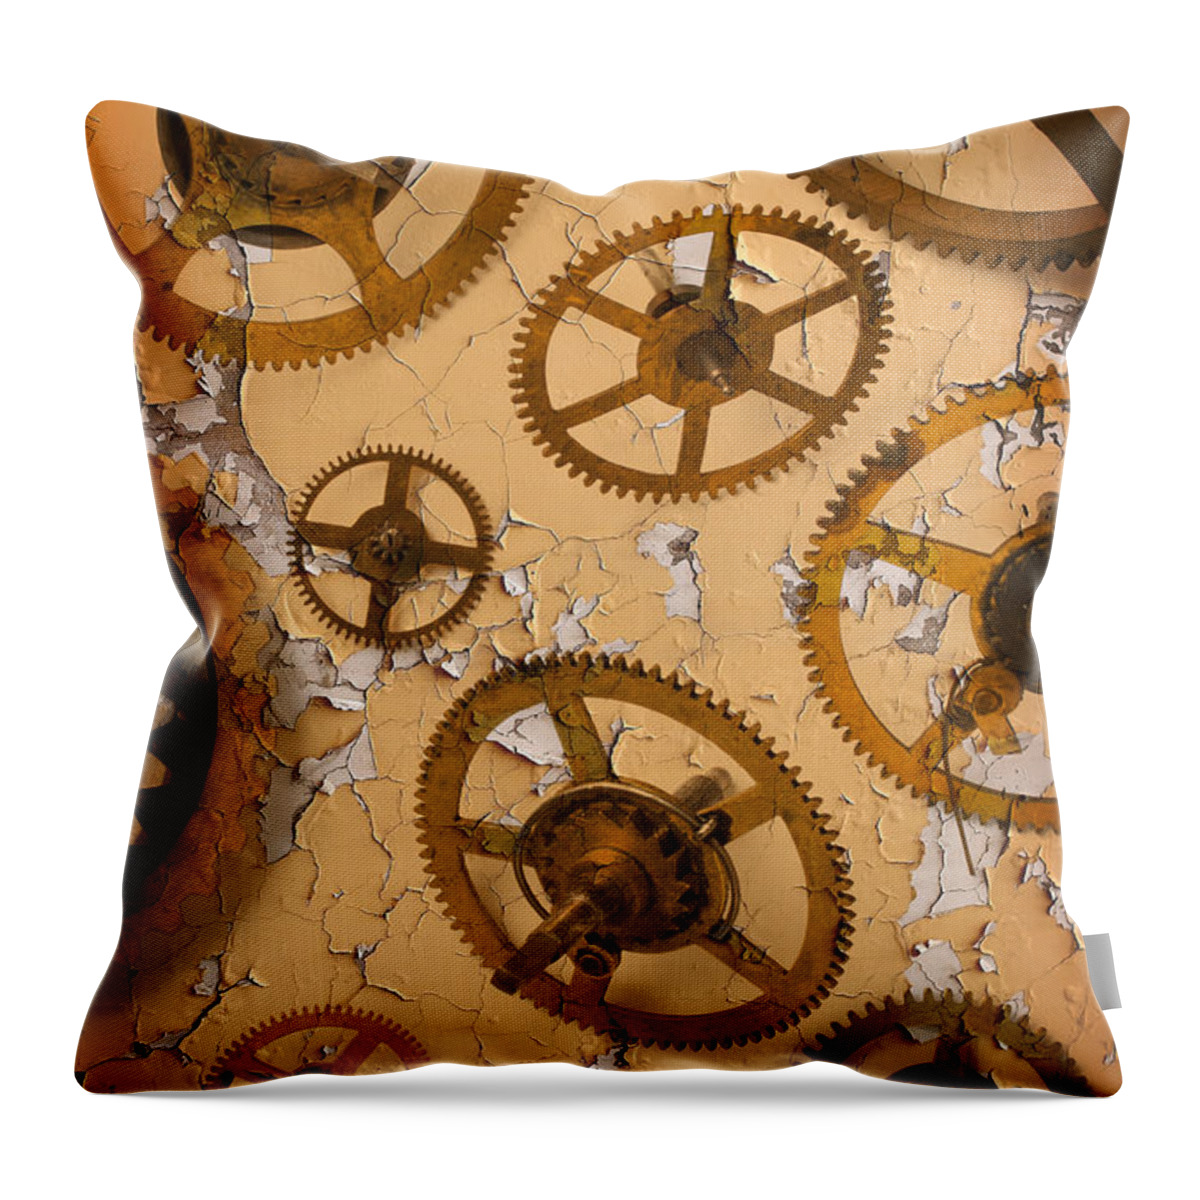  Gears Throw Pillow featuring the photograph Old Brass Gears by Garry Gay